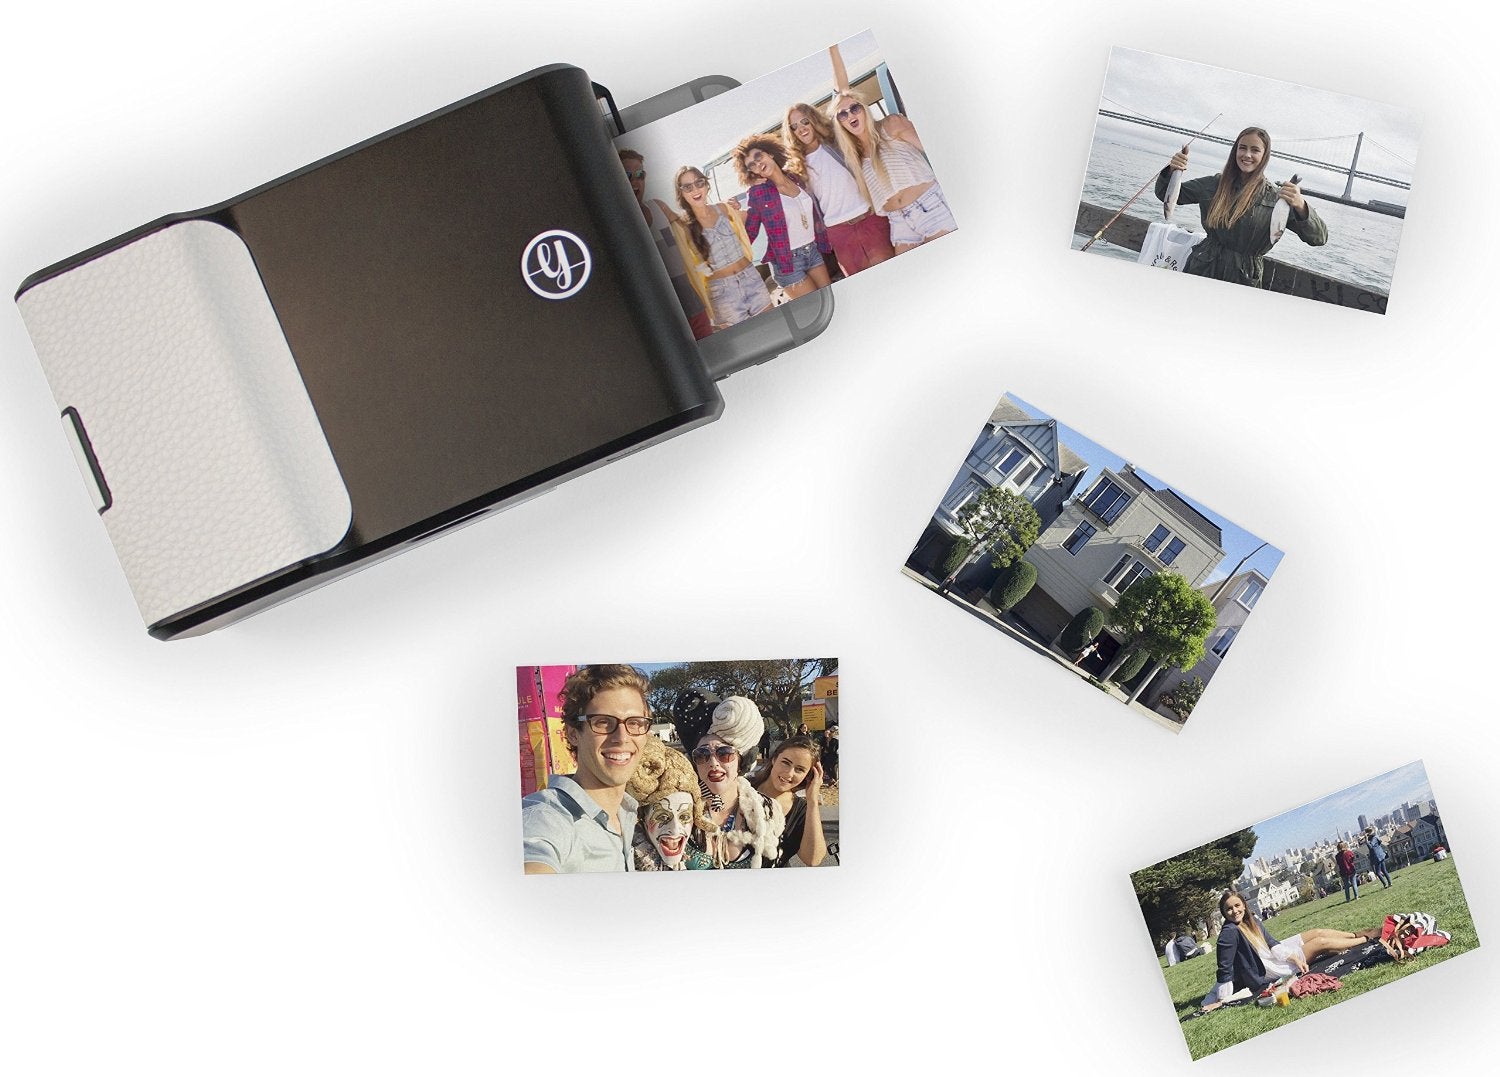 10 Great Holiday Gift Ideas For That Friend Who’s Obsessed With Taking Instagram Photos